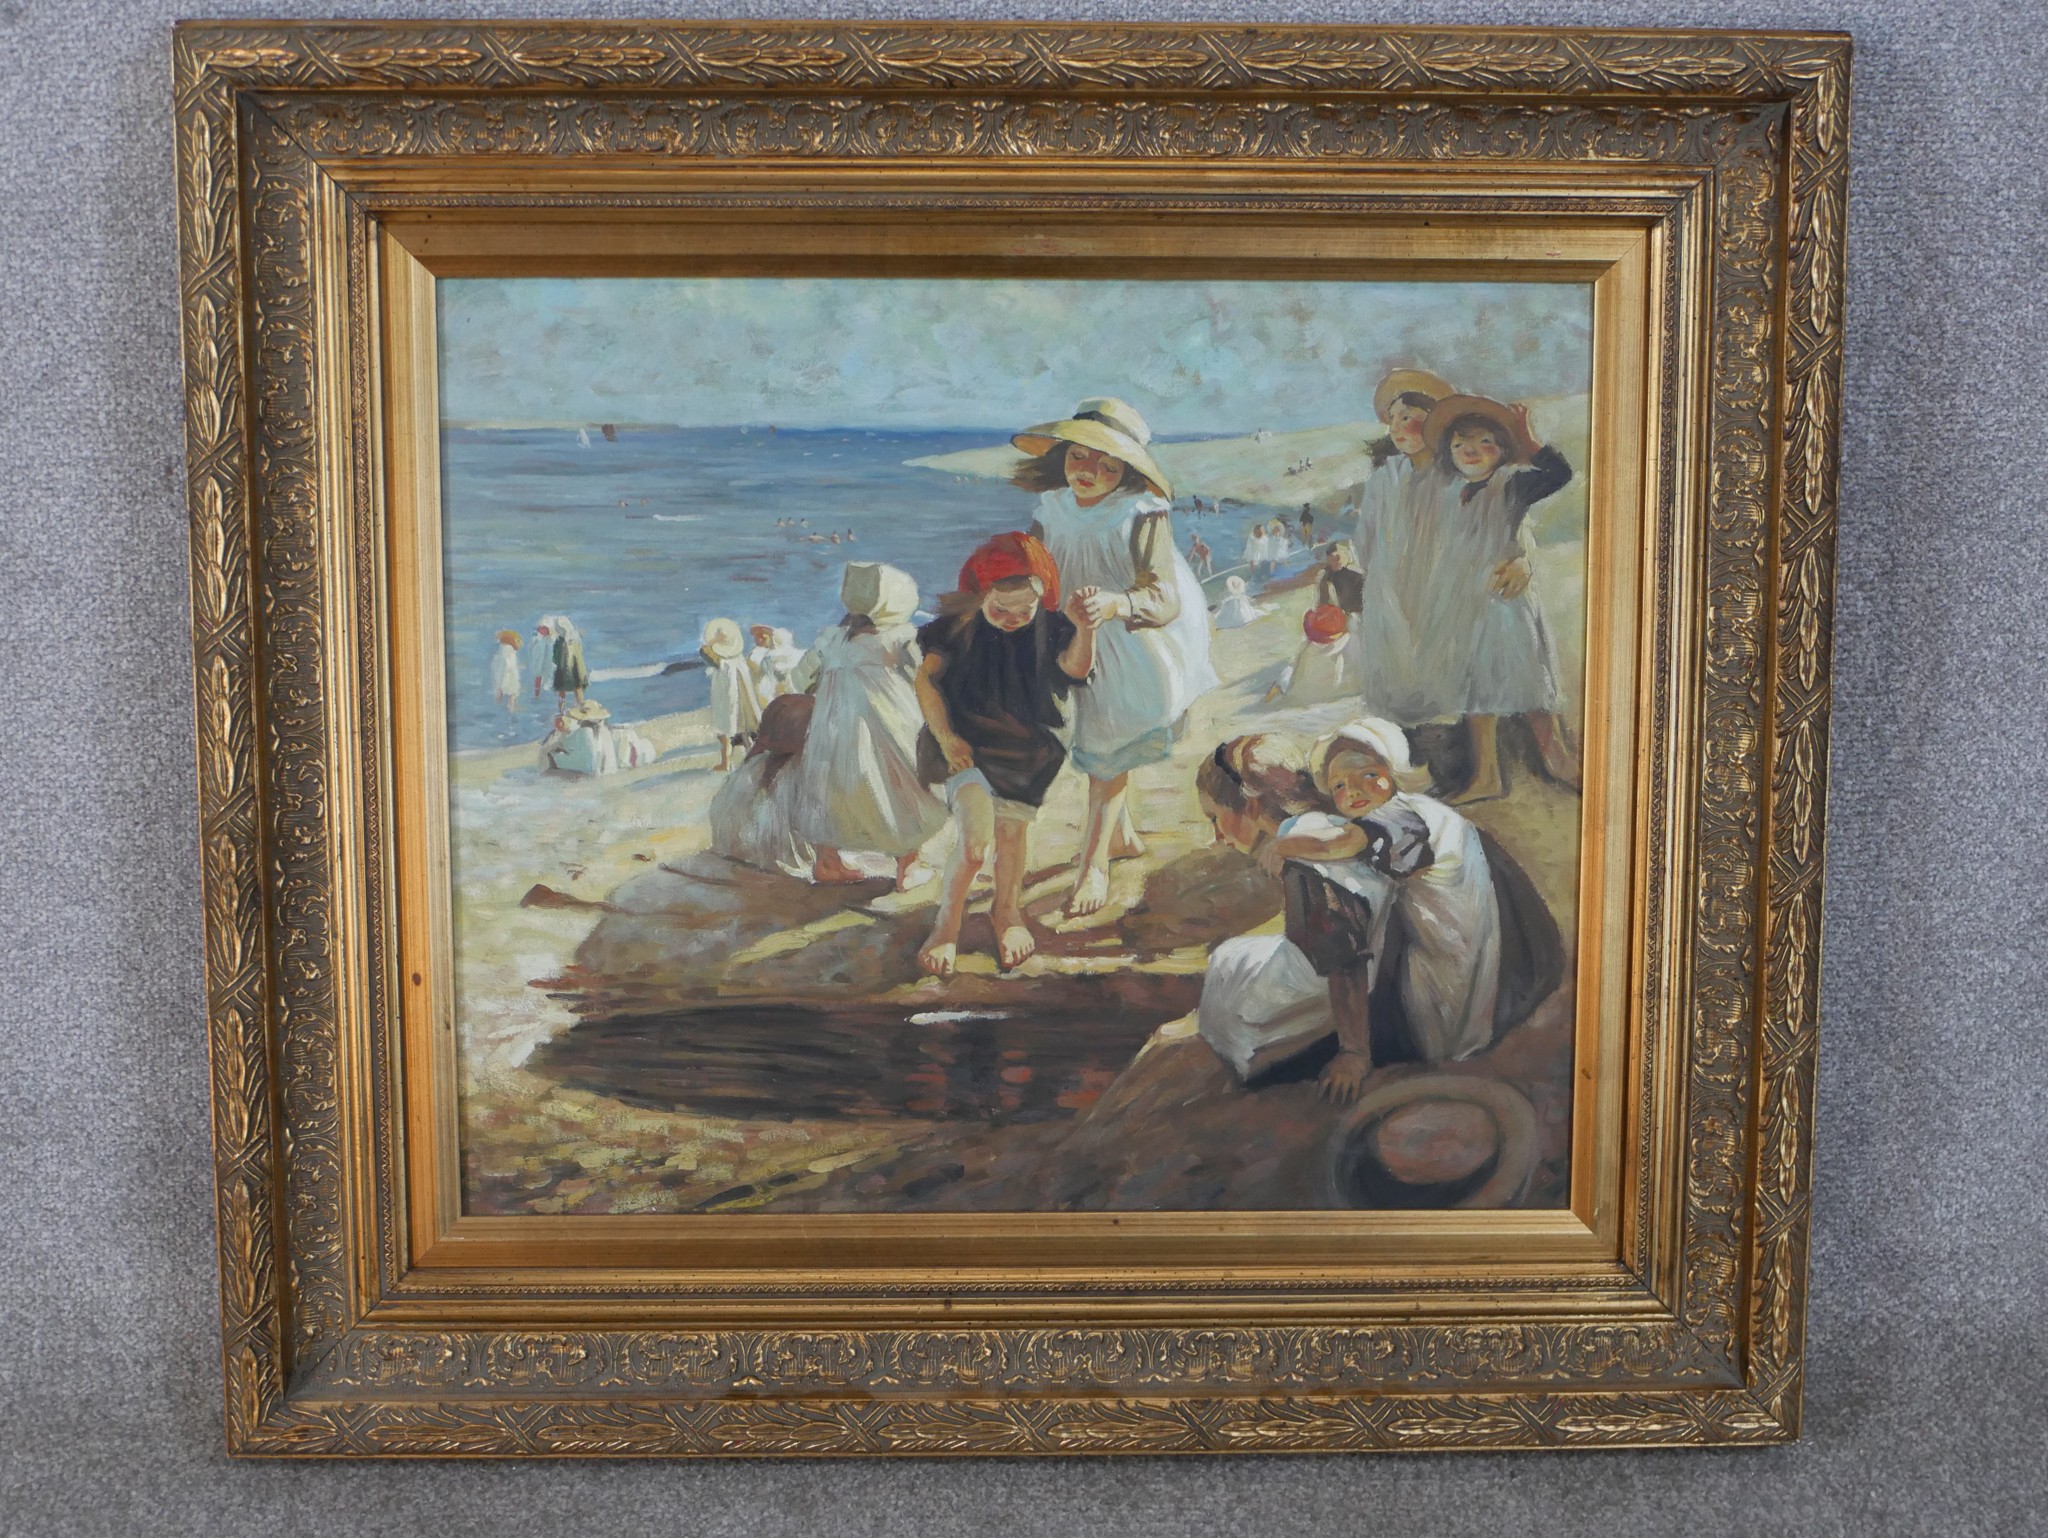 20th century, British school, children playing on the beach, oil on board, gilt framed. H.76 W.86cm - Image 2 of 6